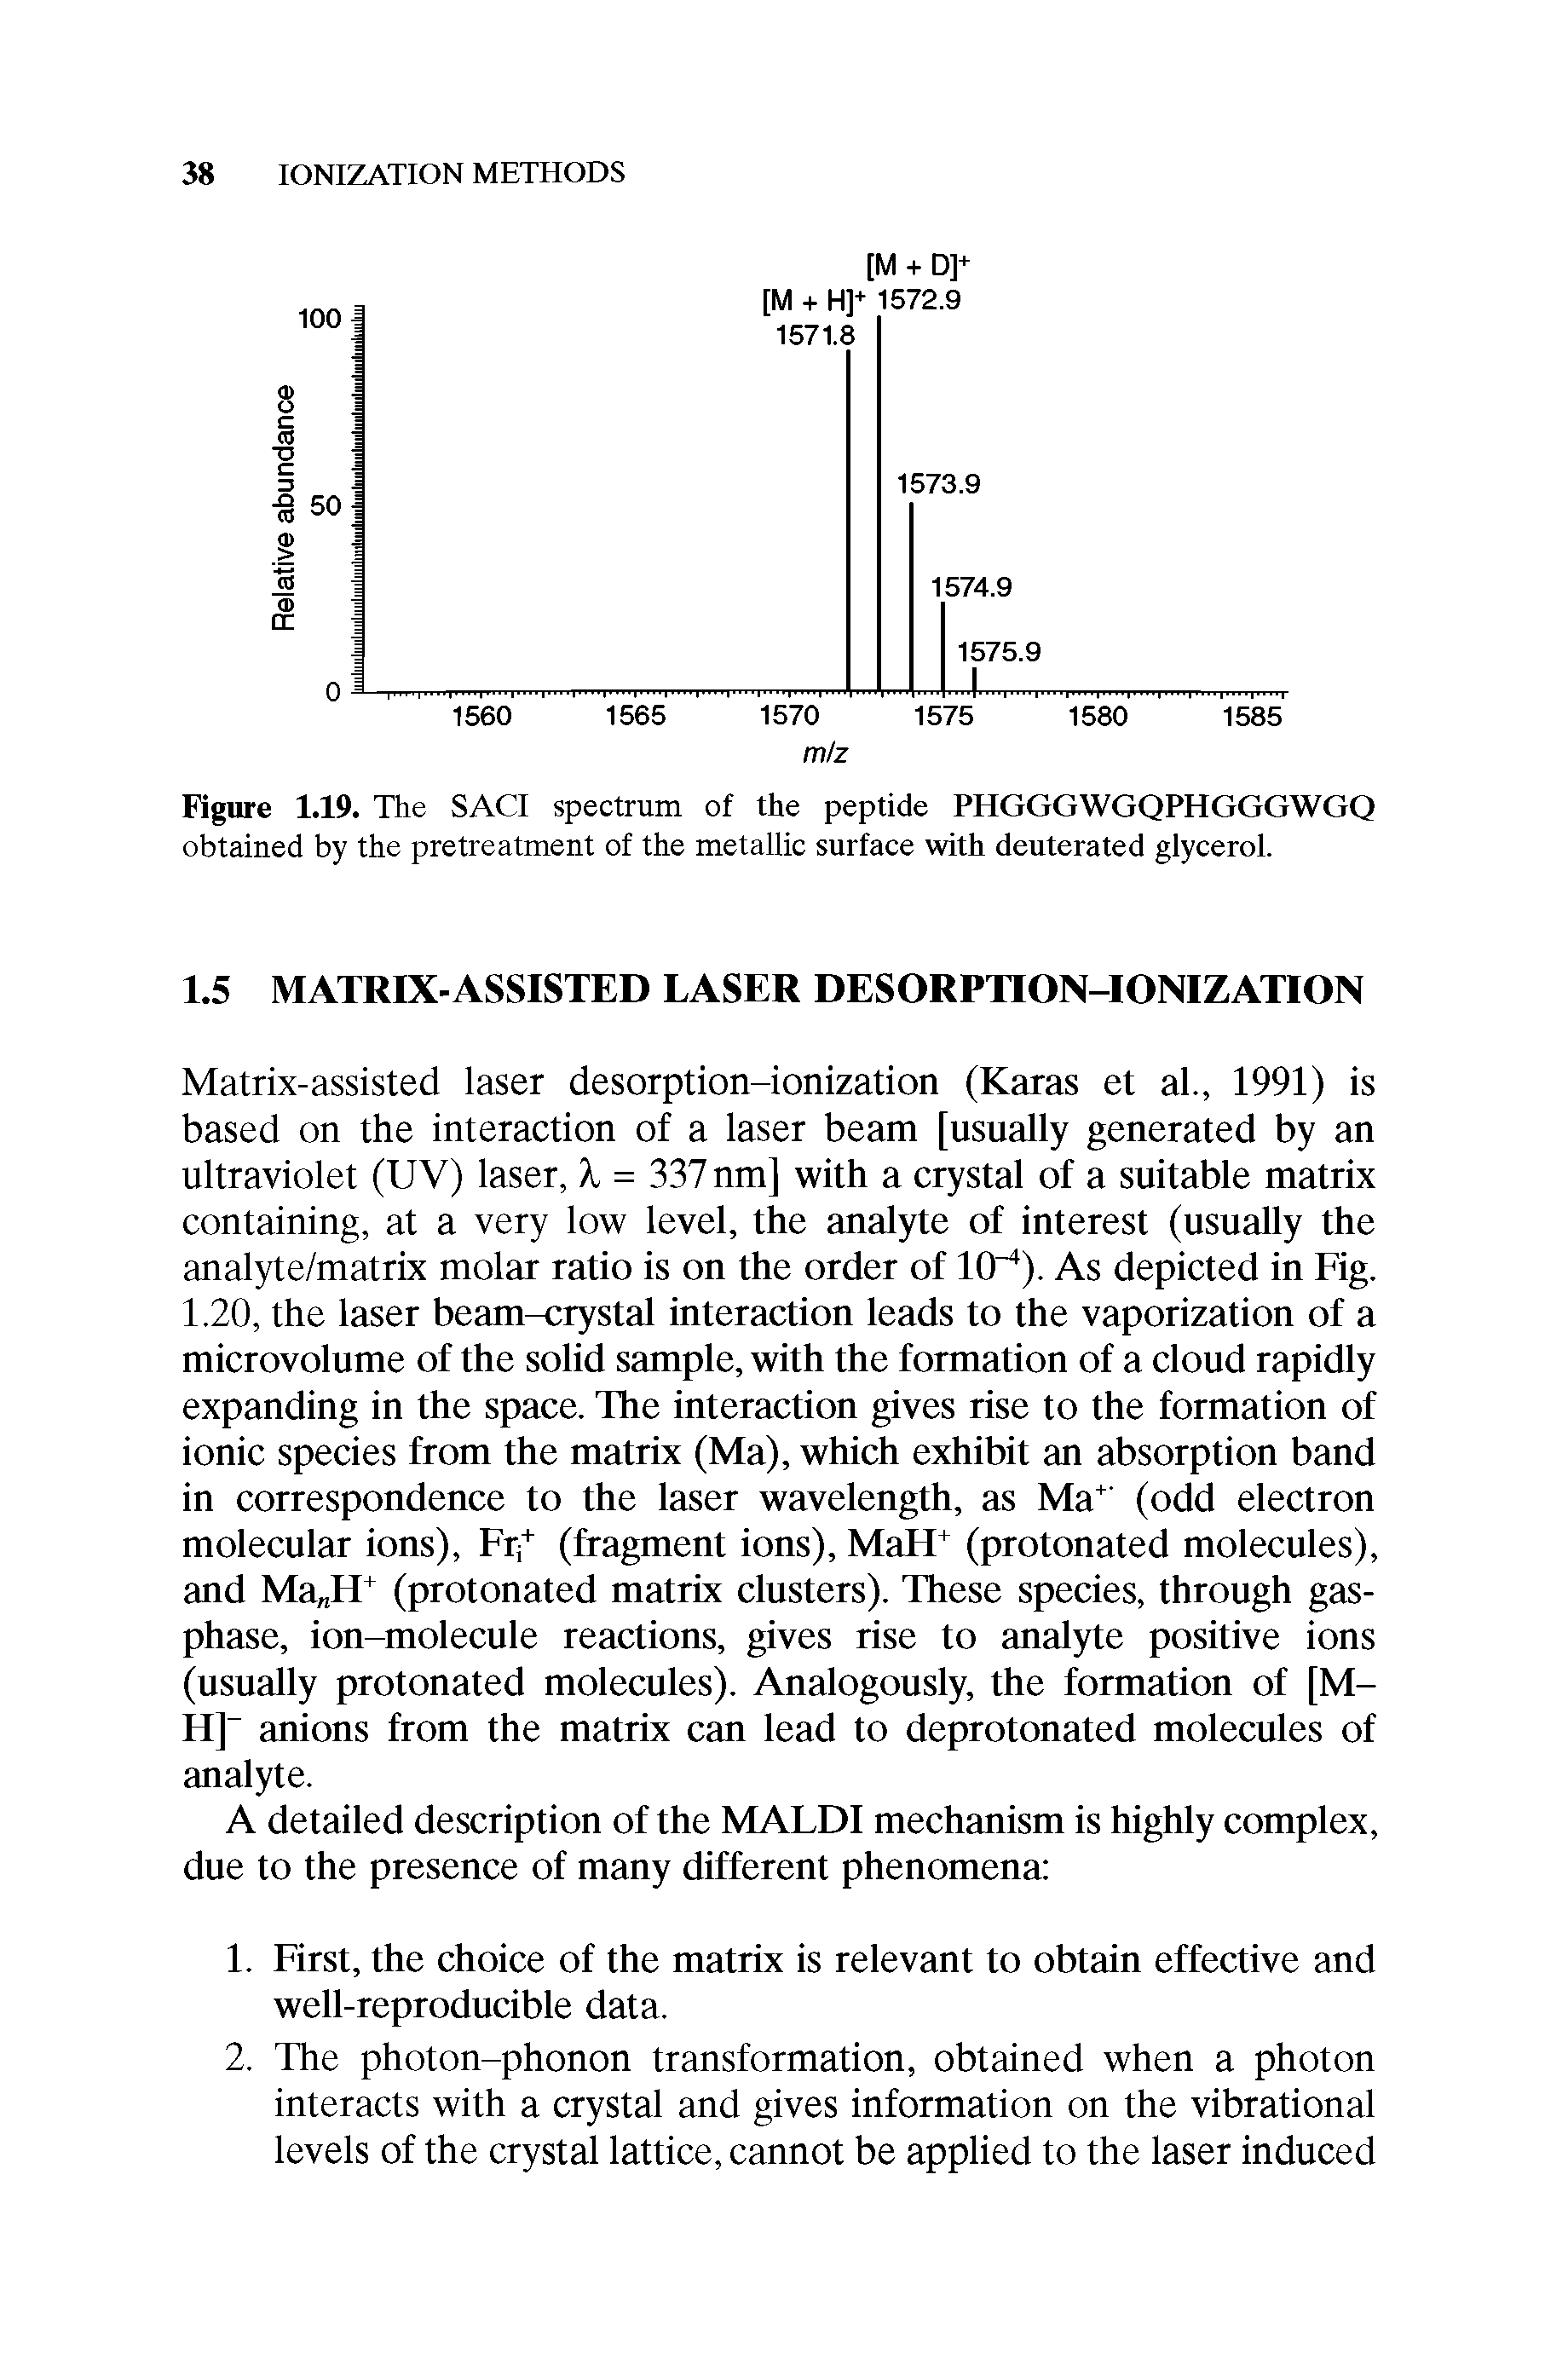 Figure 1.19. The SACI spectrum of the peptide PHGGGWGQPHGGGWGQ obtained by the pretreatment of the metallic surface with deuterated glycerol.